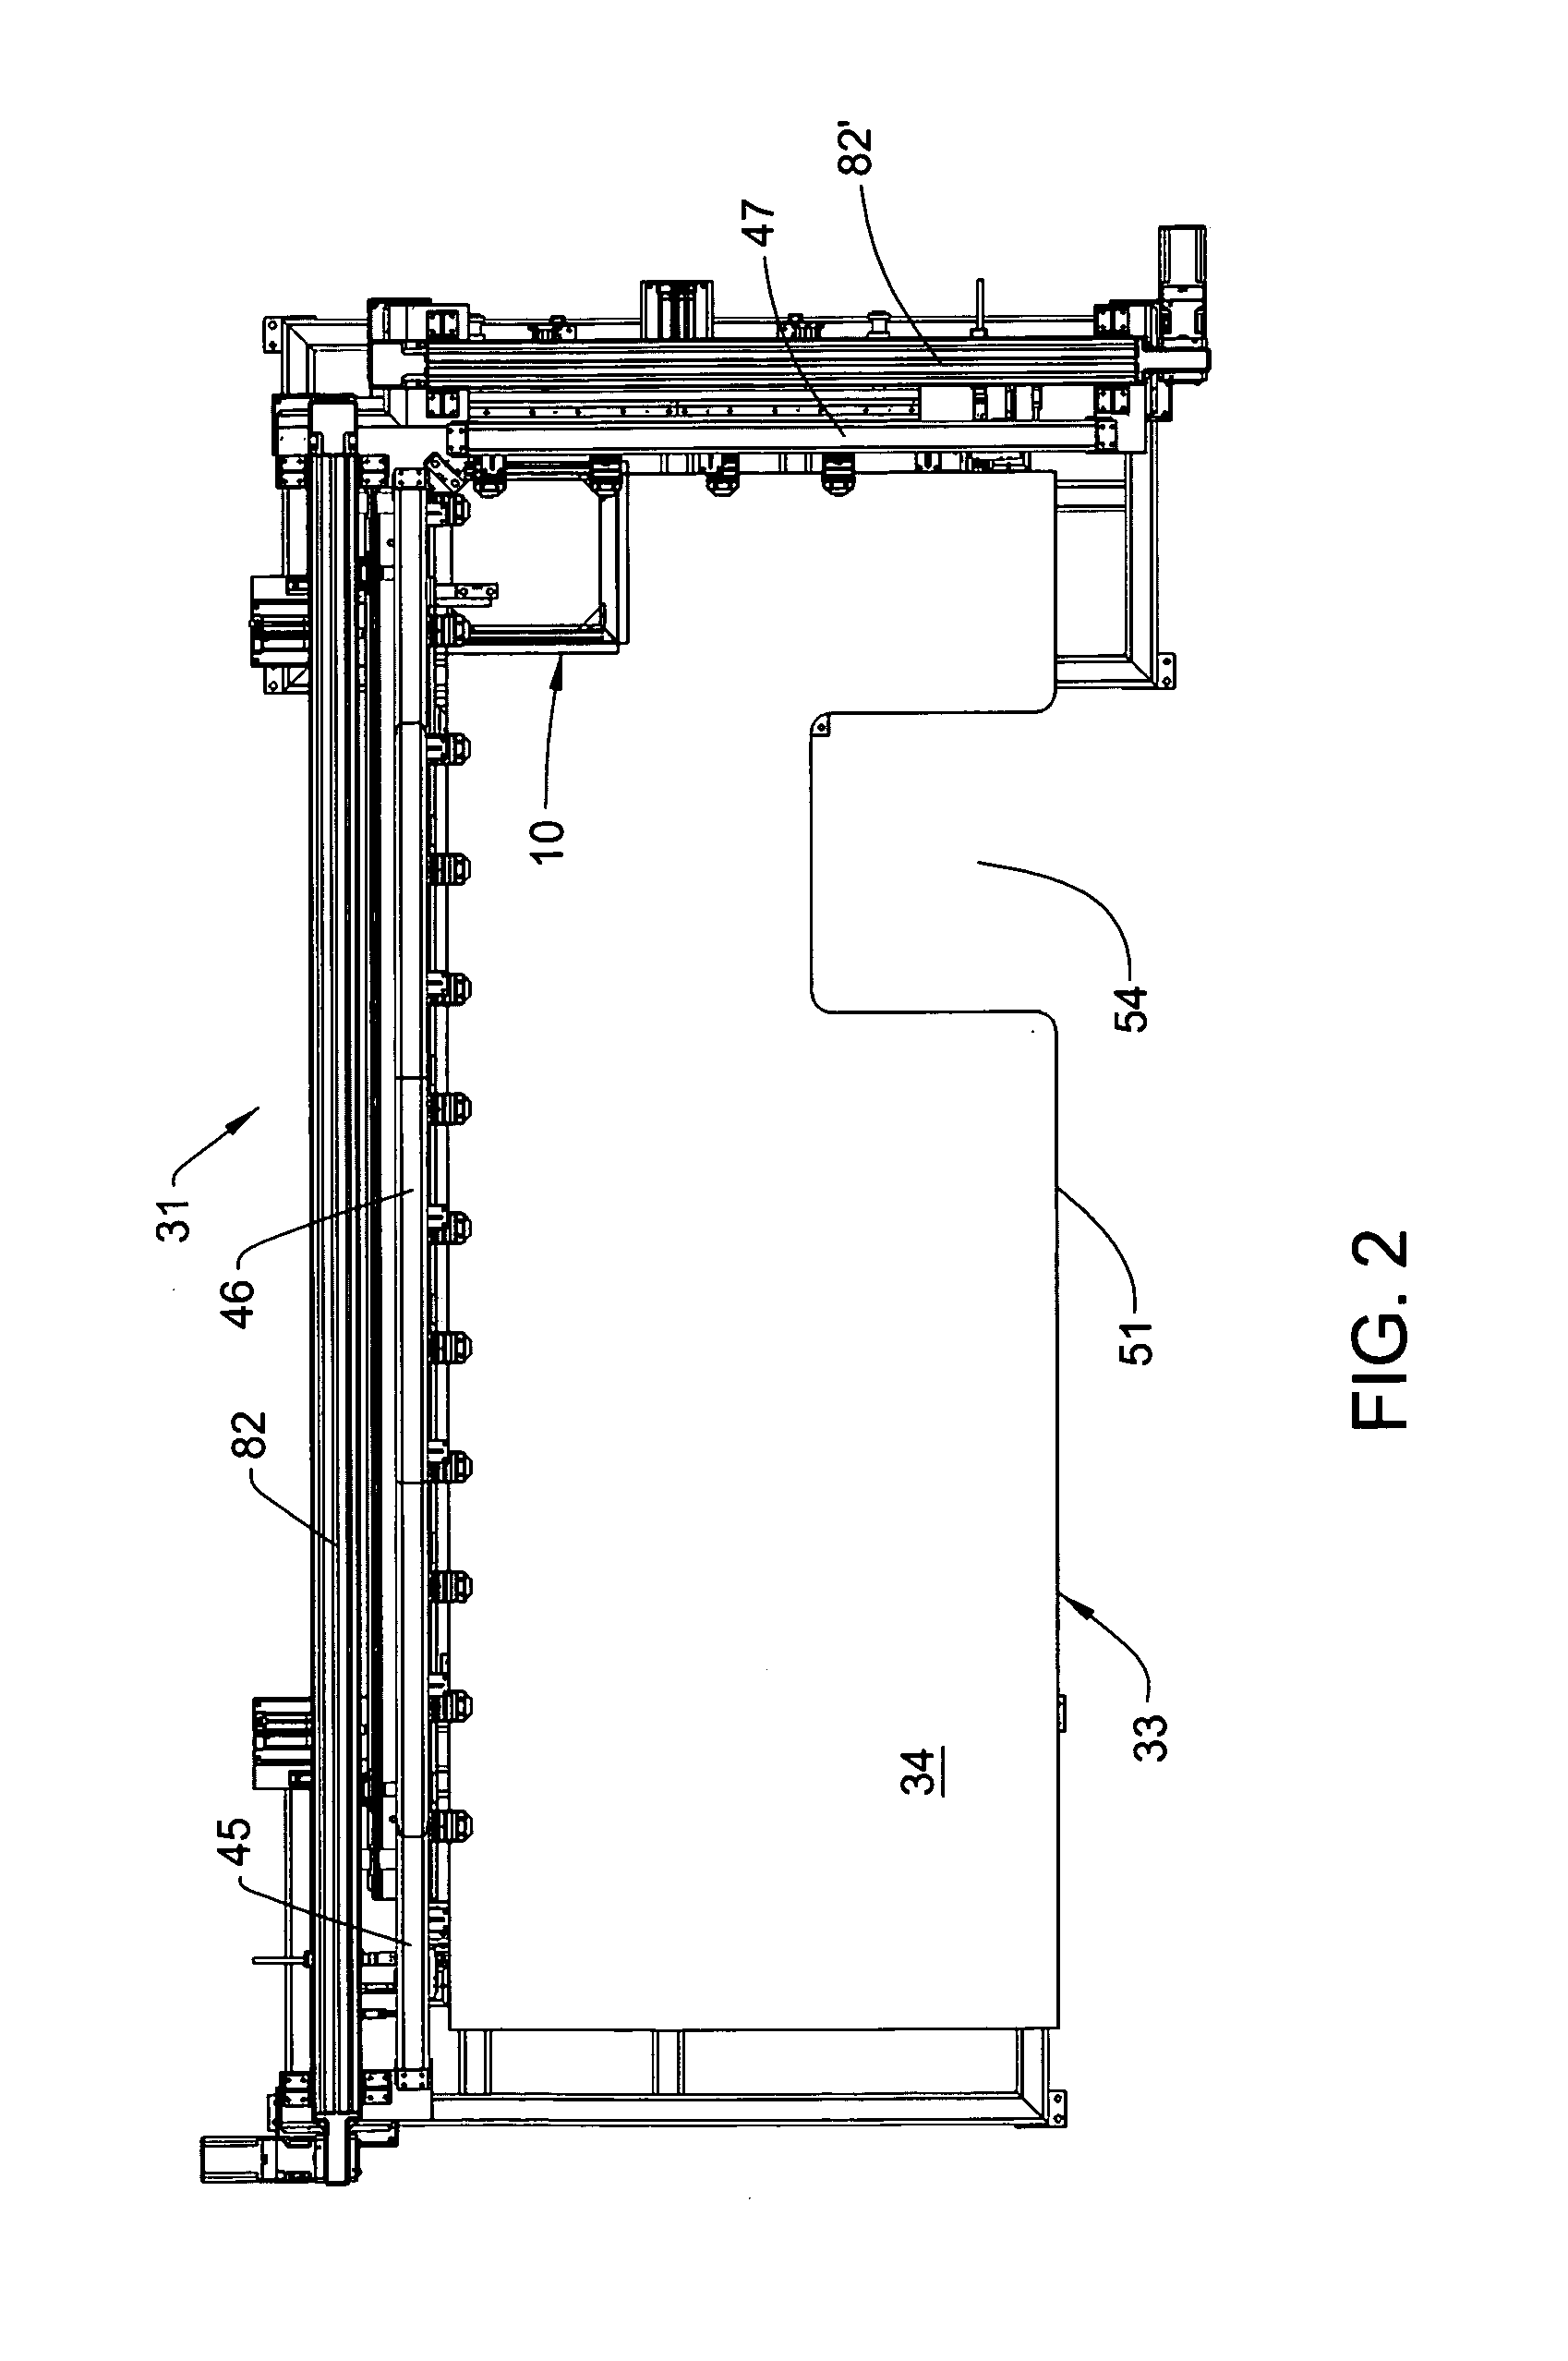 Apparatus and process for wrapping and securing edge flaps of flexible cover sheet to panel structure